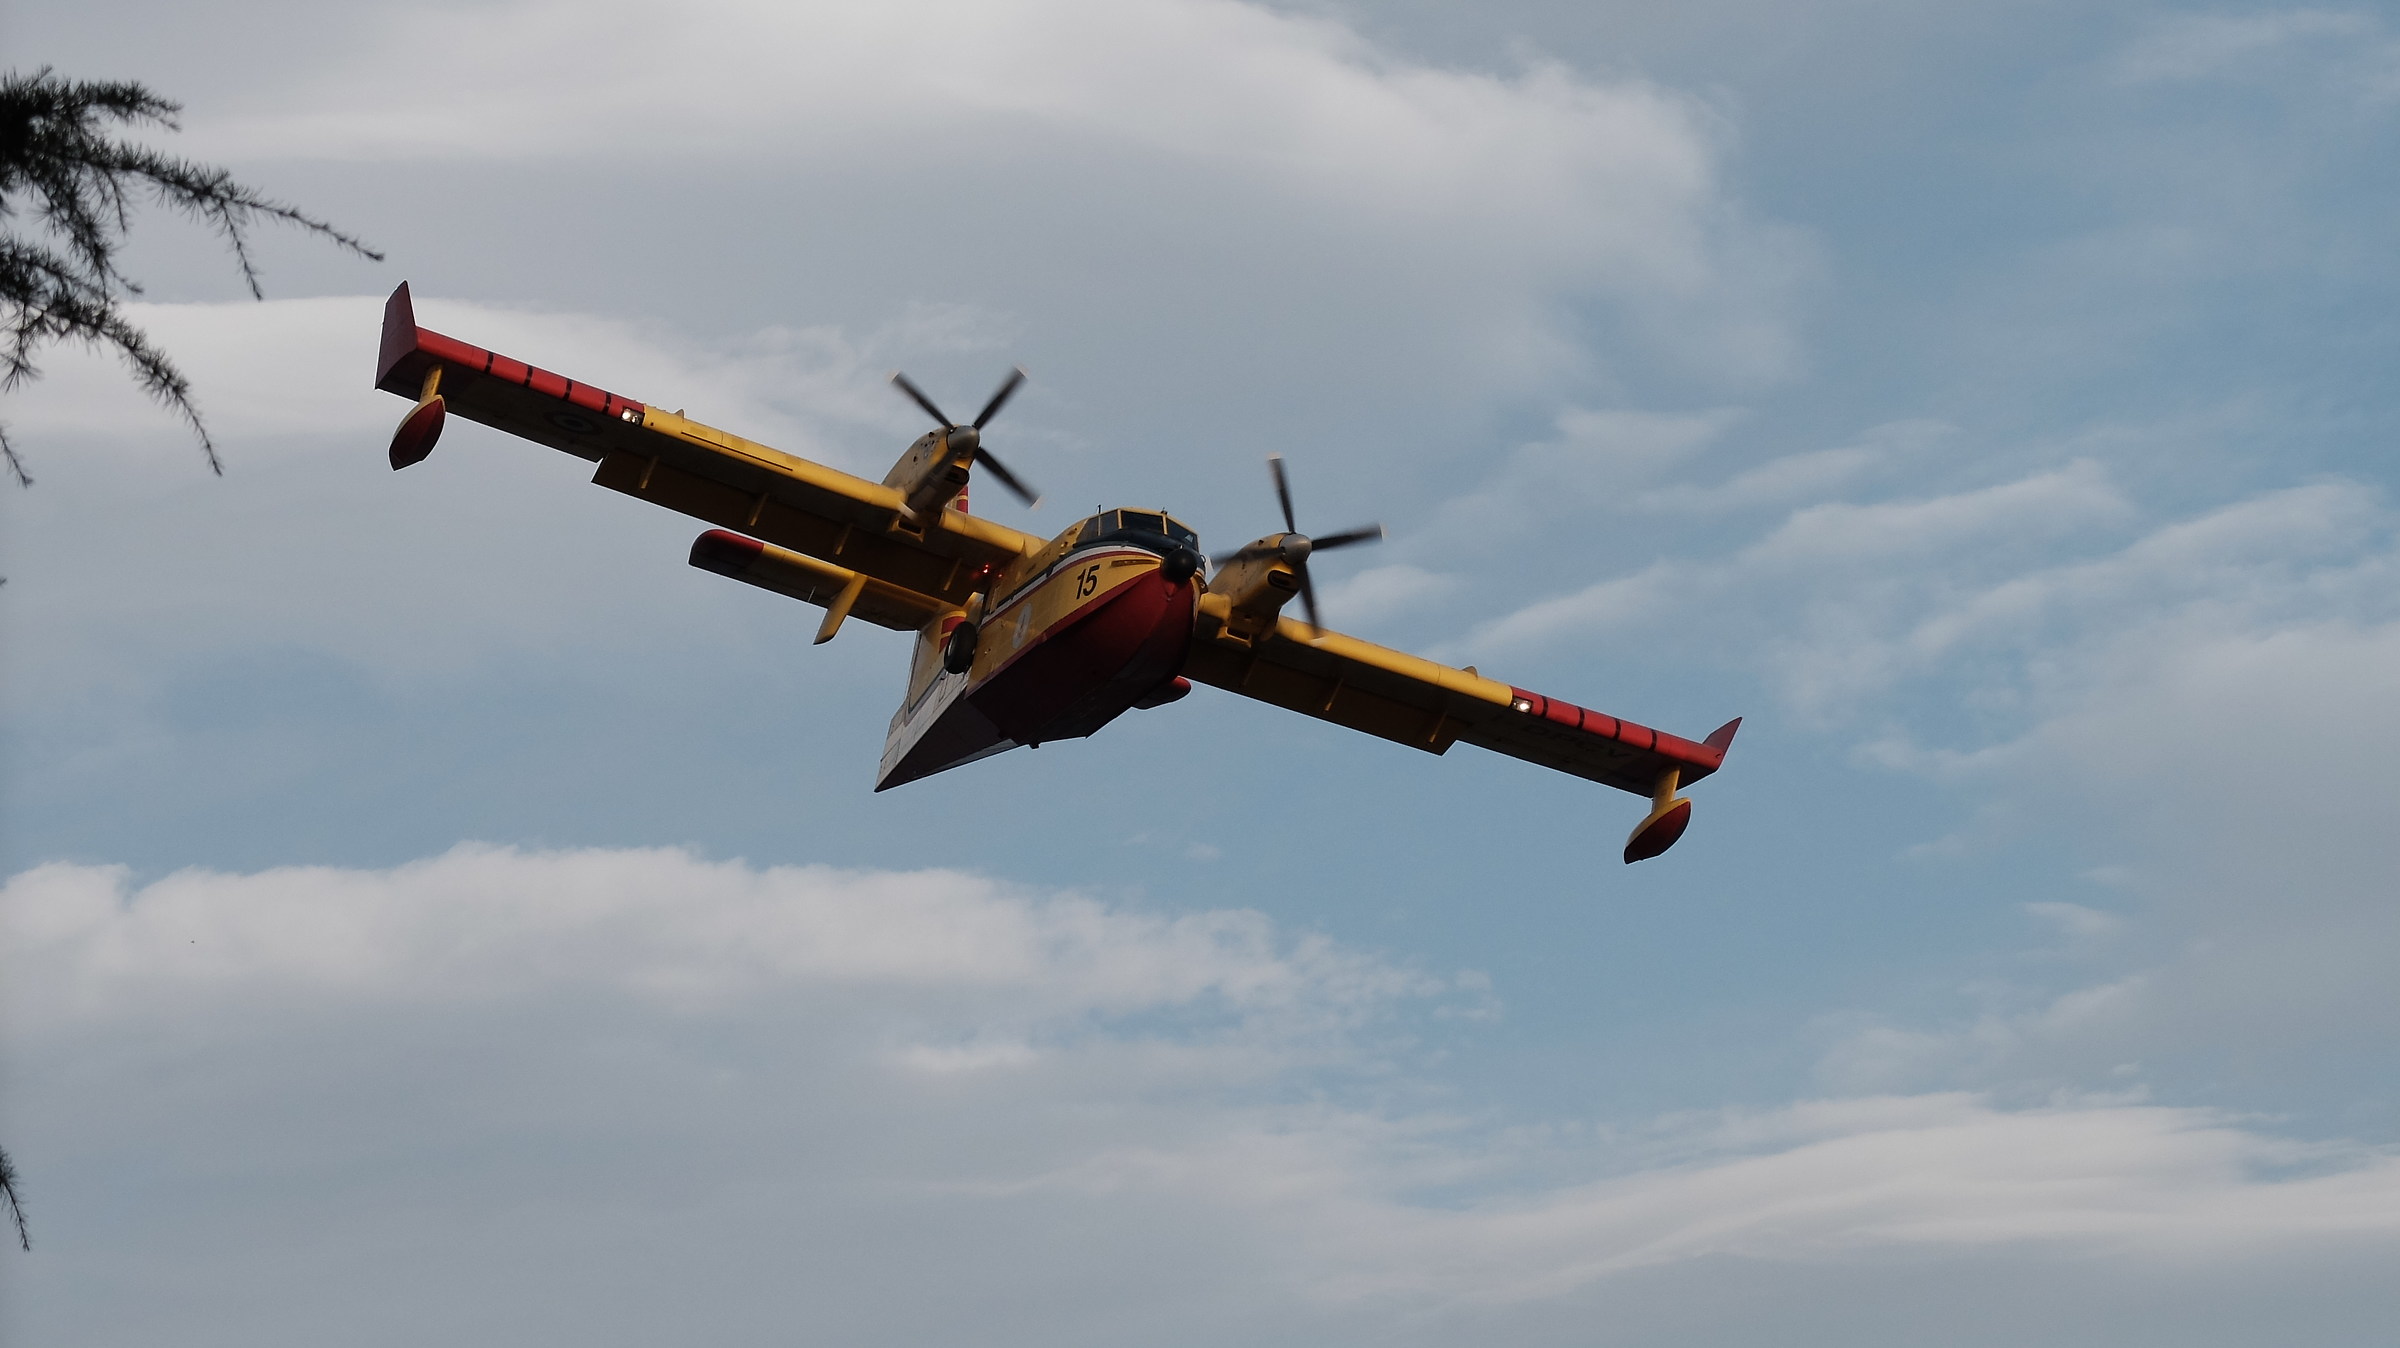 Canadair in action...